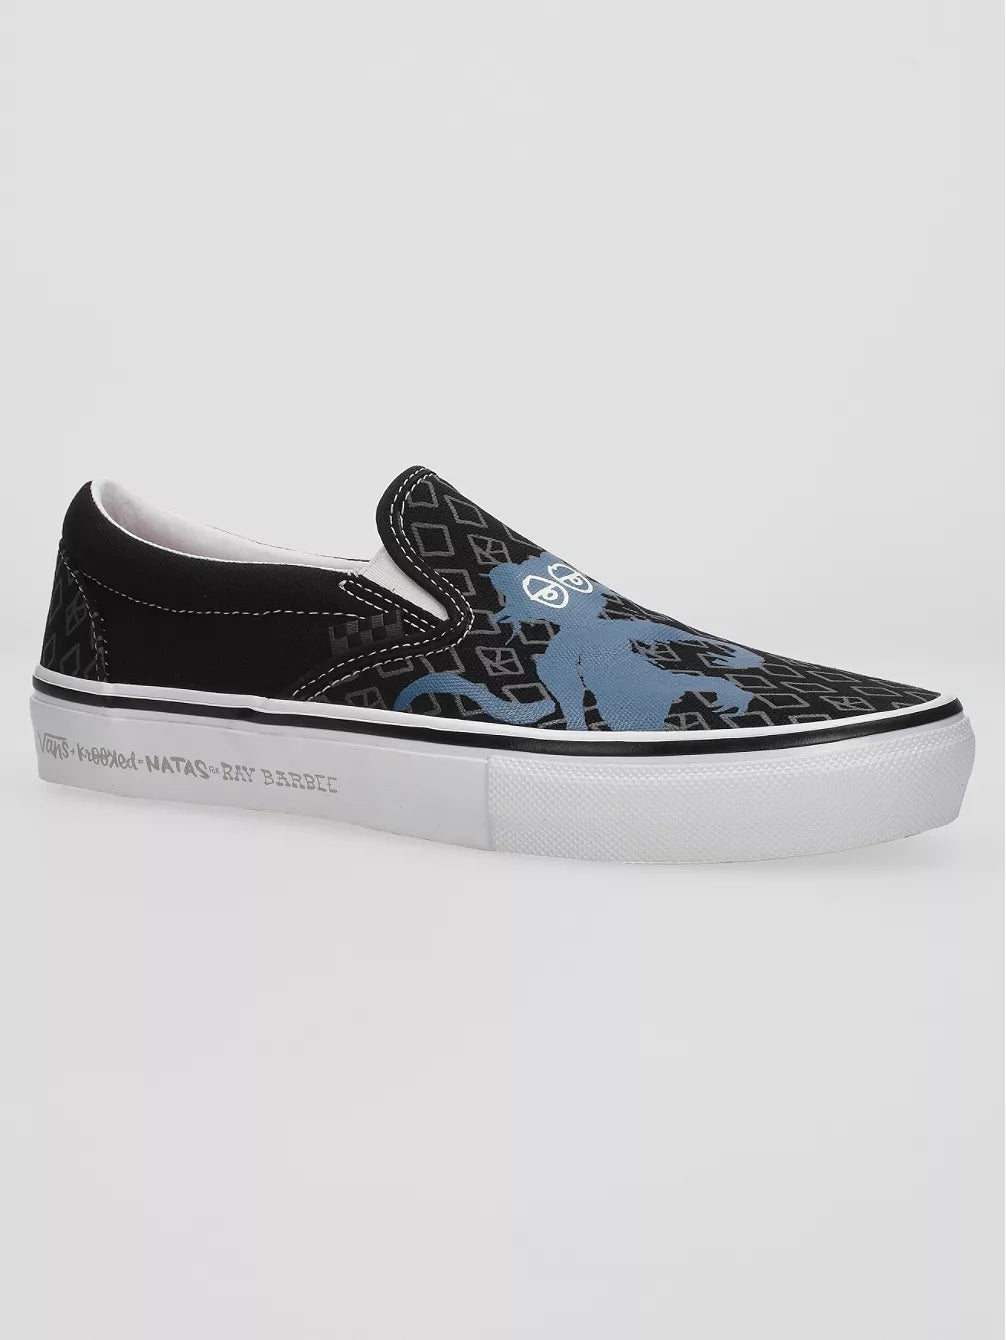 Vans Skate Slip-On Krooked By Natas For Ray